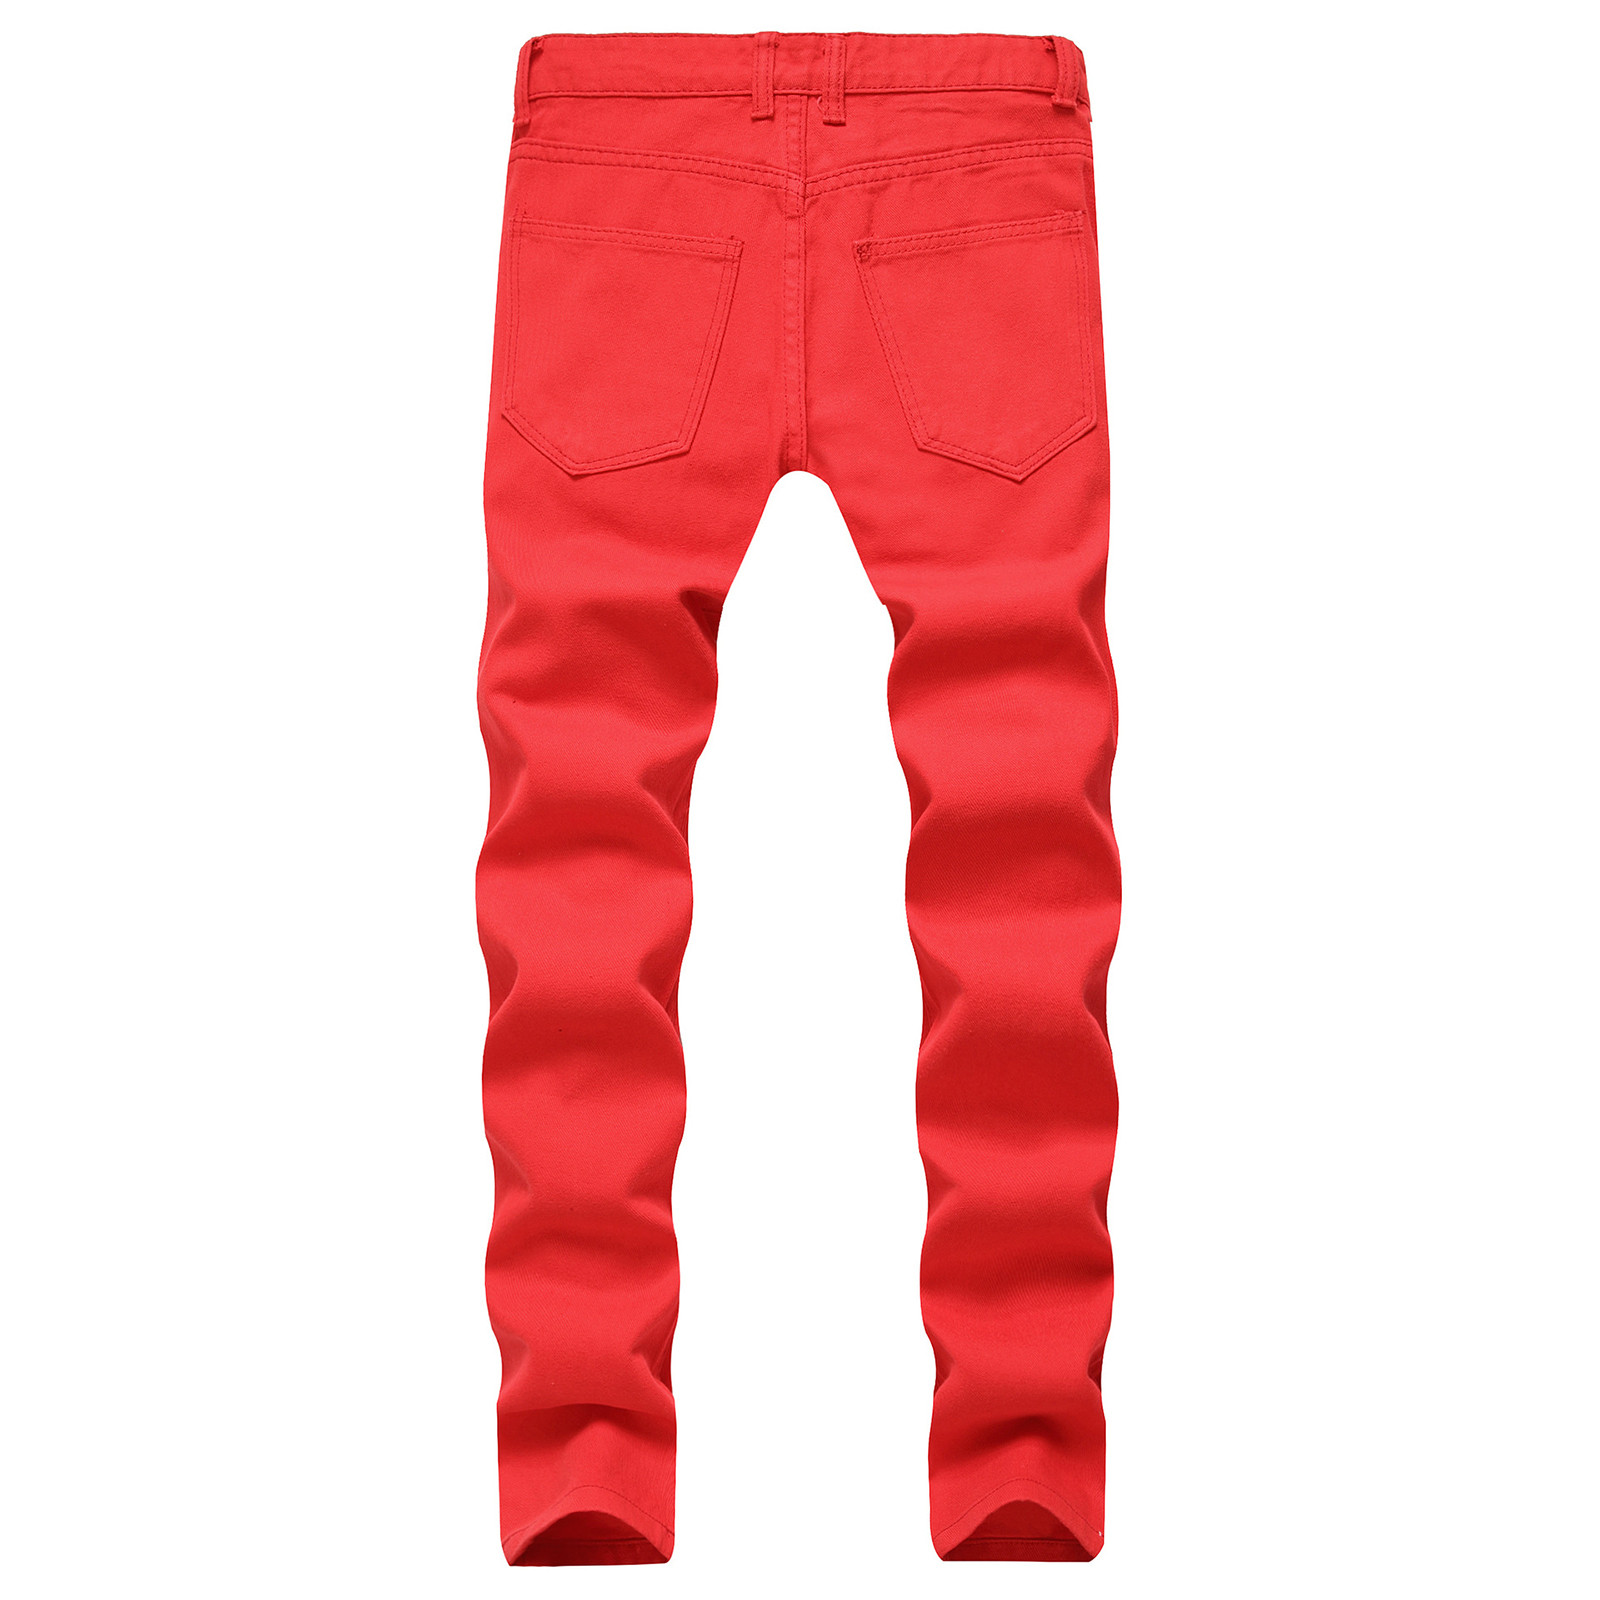 Pants for Men's Jeans Newly Slim Ripped Hip-hop Stretch Denim Cargo Pants Motorcycle Capri Trouse Pencil Pants - image 4 of 4